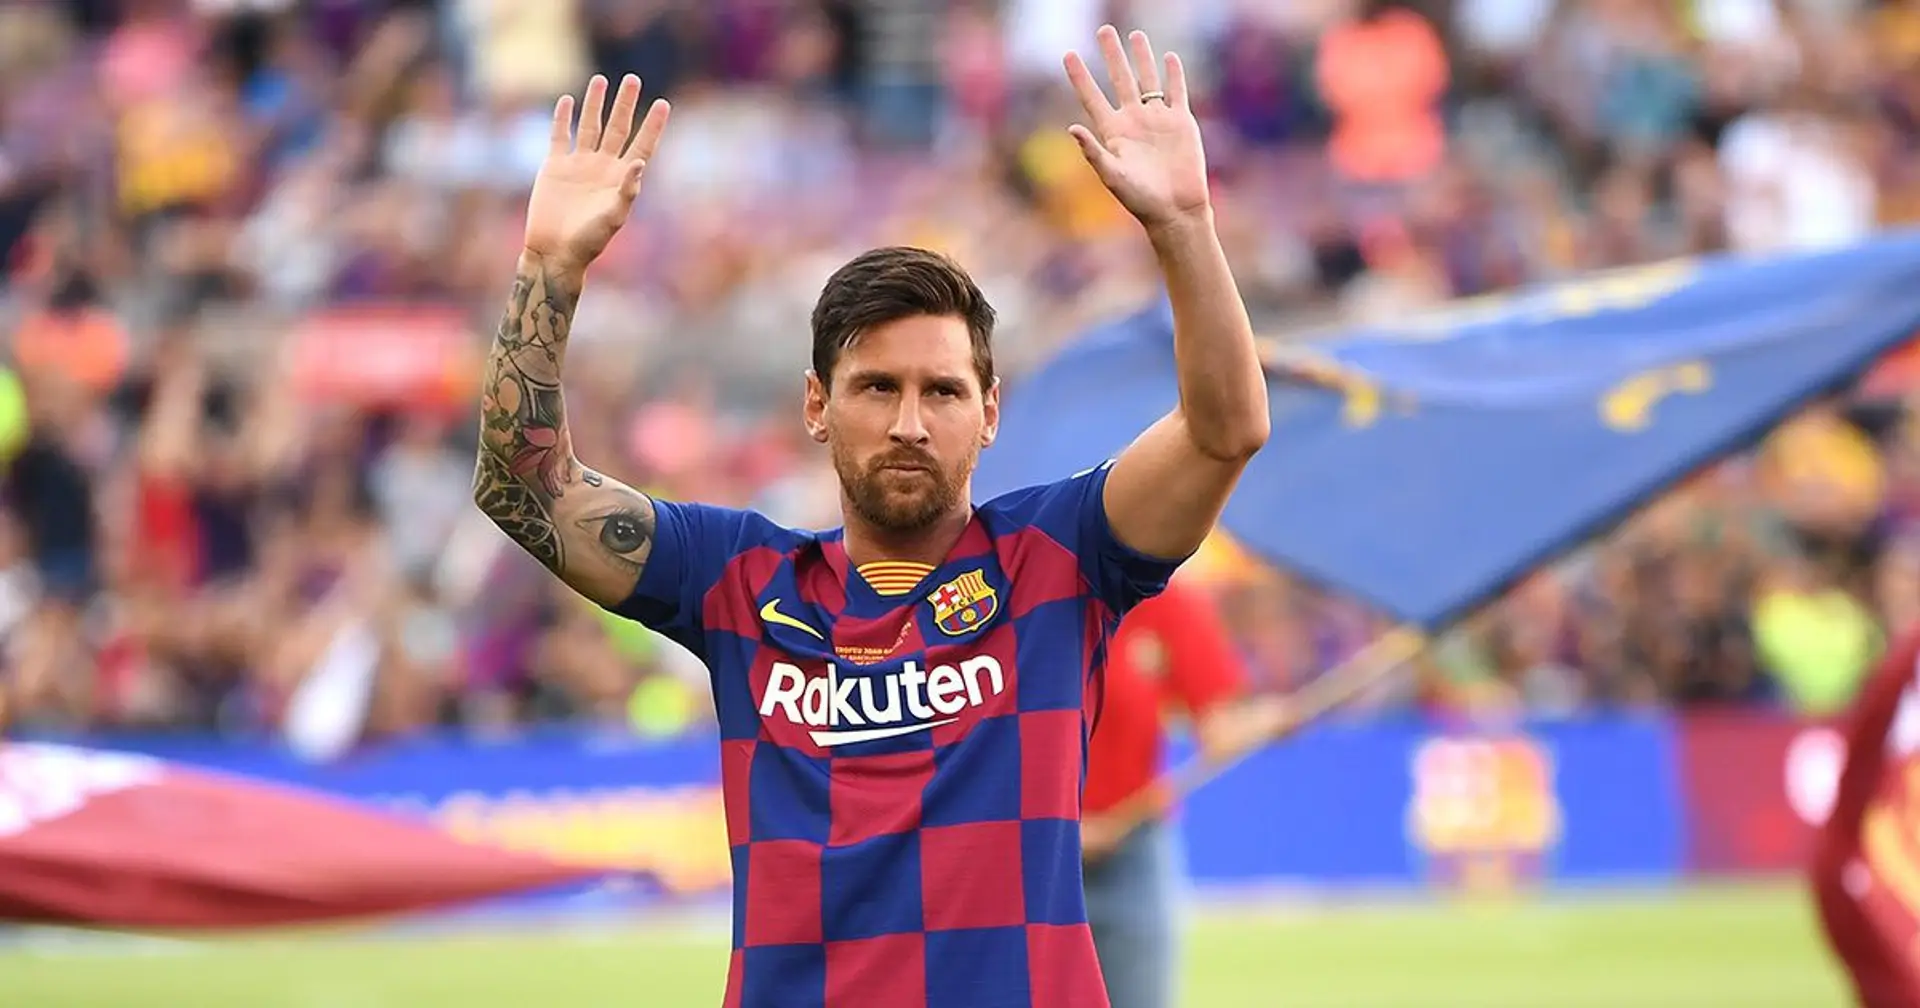 4 things Leo Messi should be expected to achieve even at weak Barca – especially if it's his last year